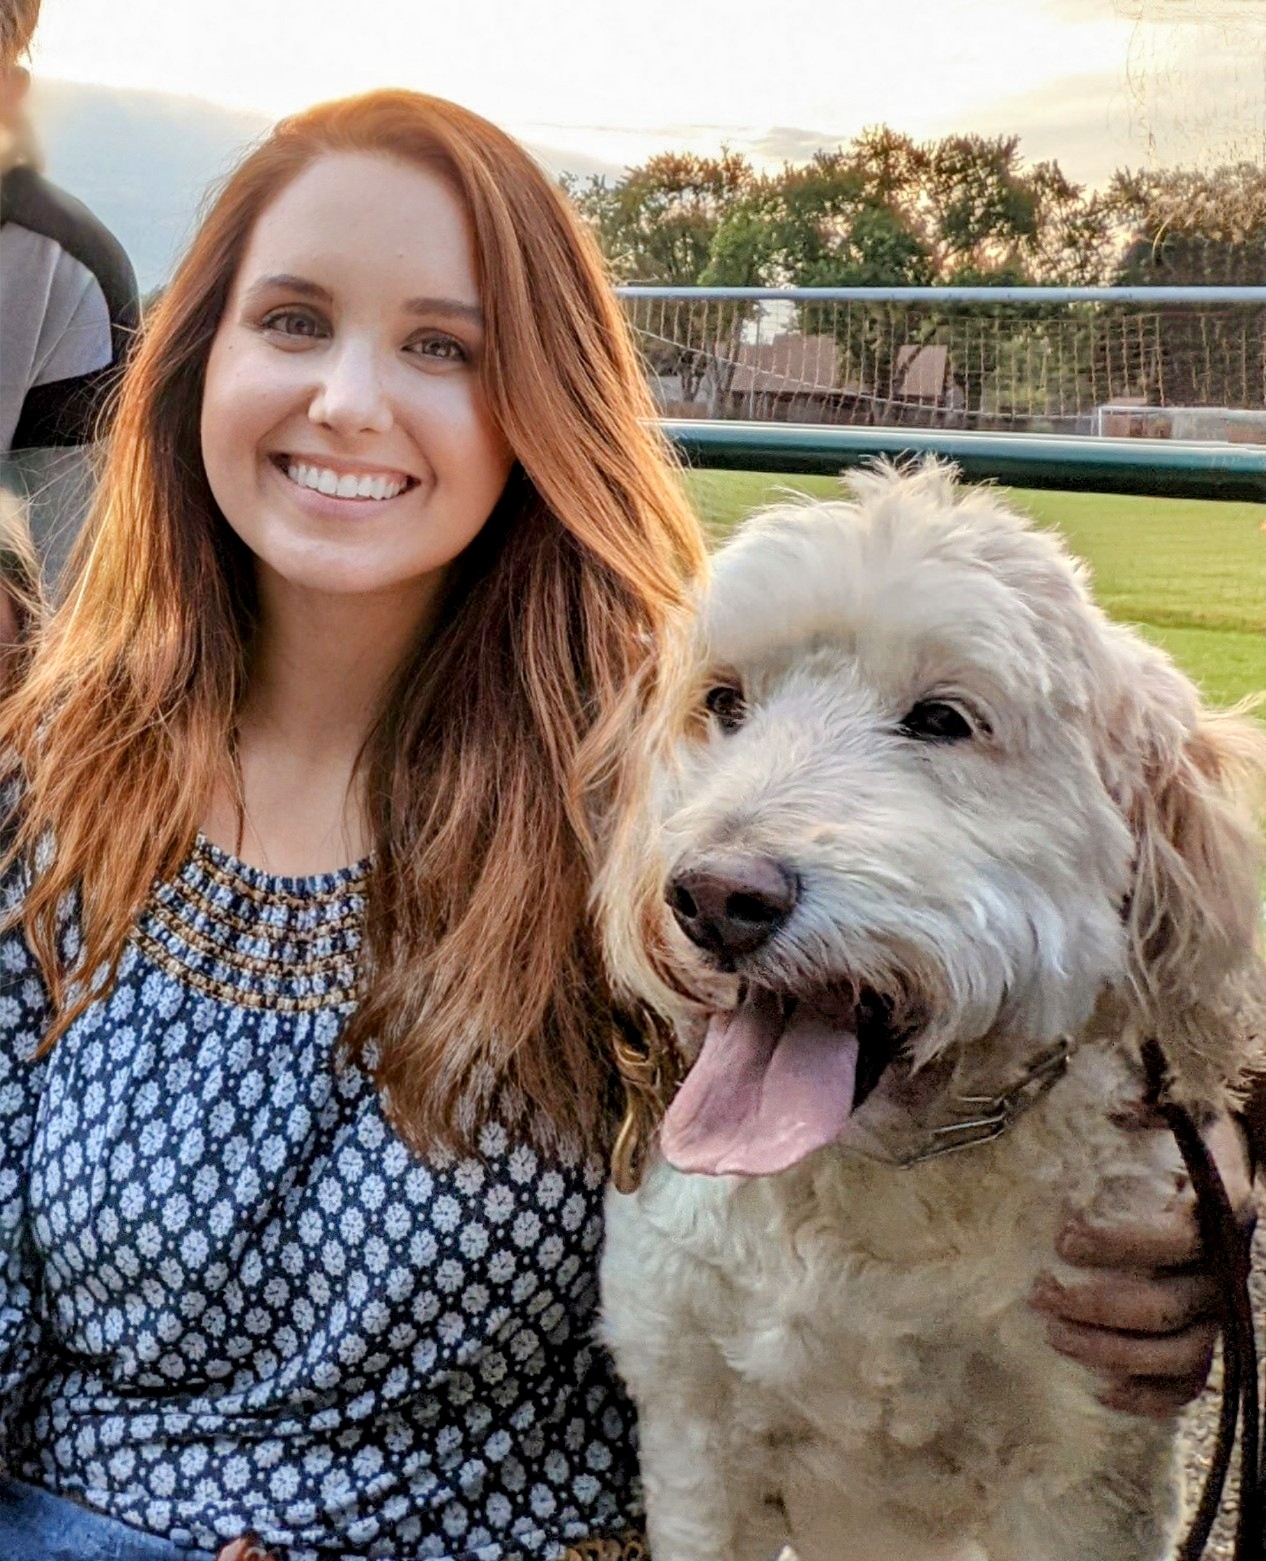 goldendoodle blog profile pic - woman with goldendoodle dog